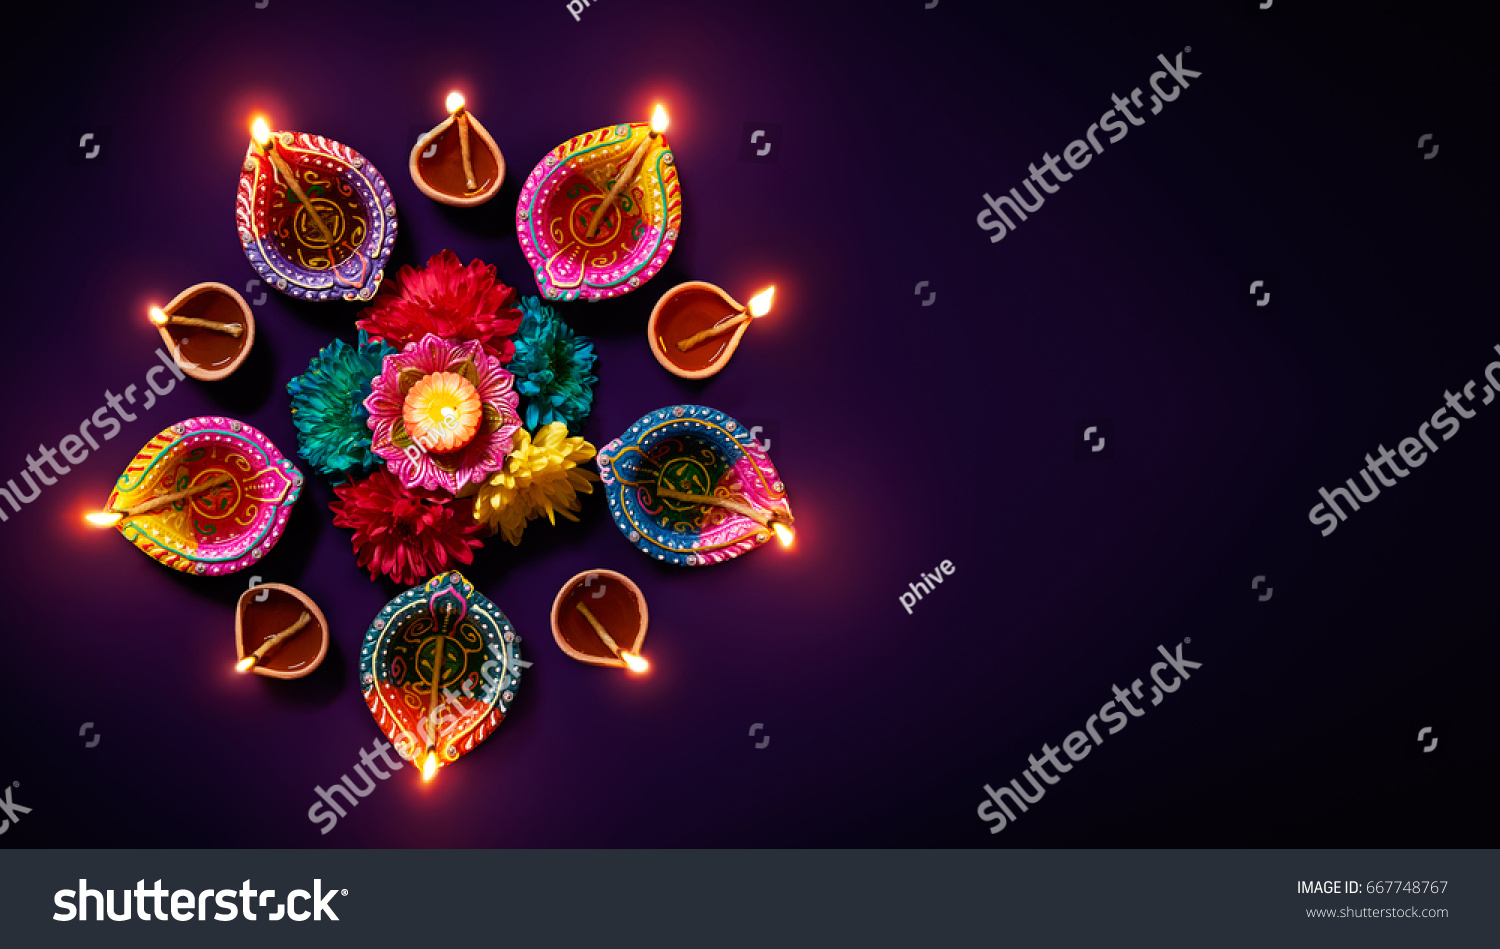 Colorful clay diya lamps with flowers on purple background #667748767